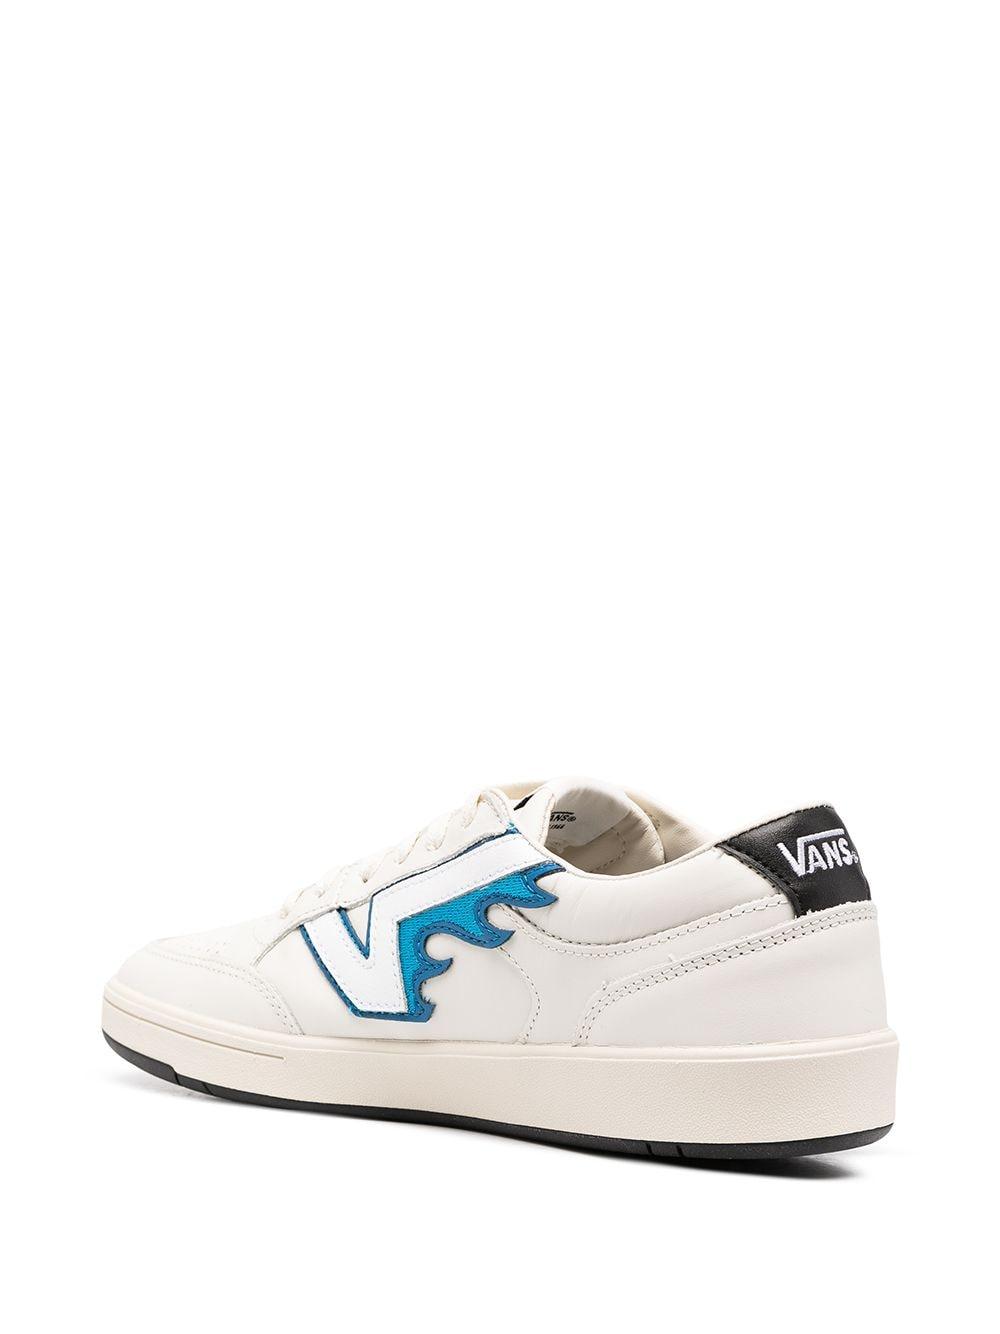 Vans Flame Lowland Comfycush Low-top Sneakers in White | Lyst